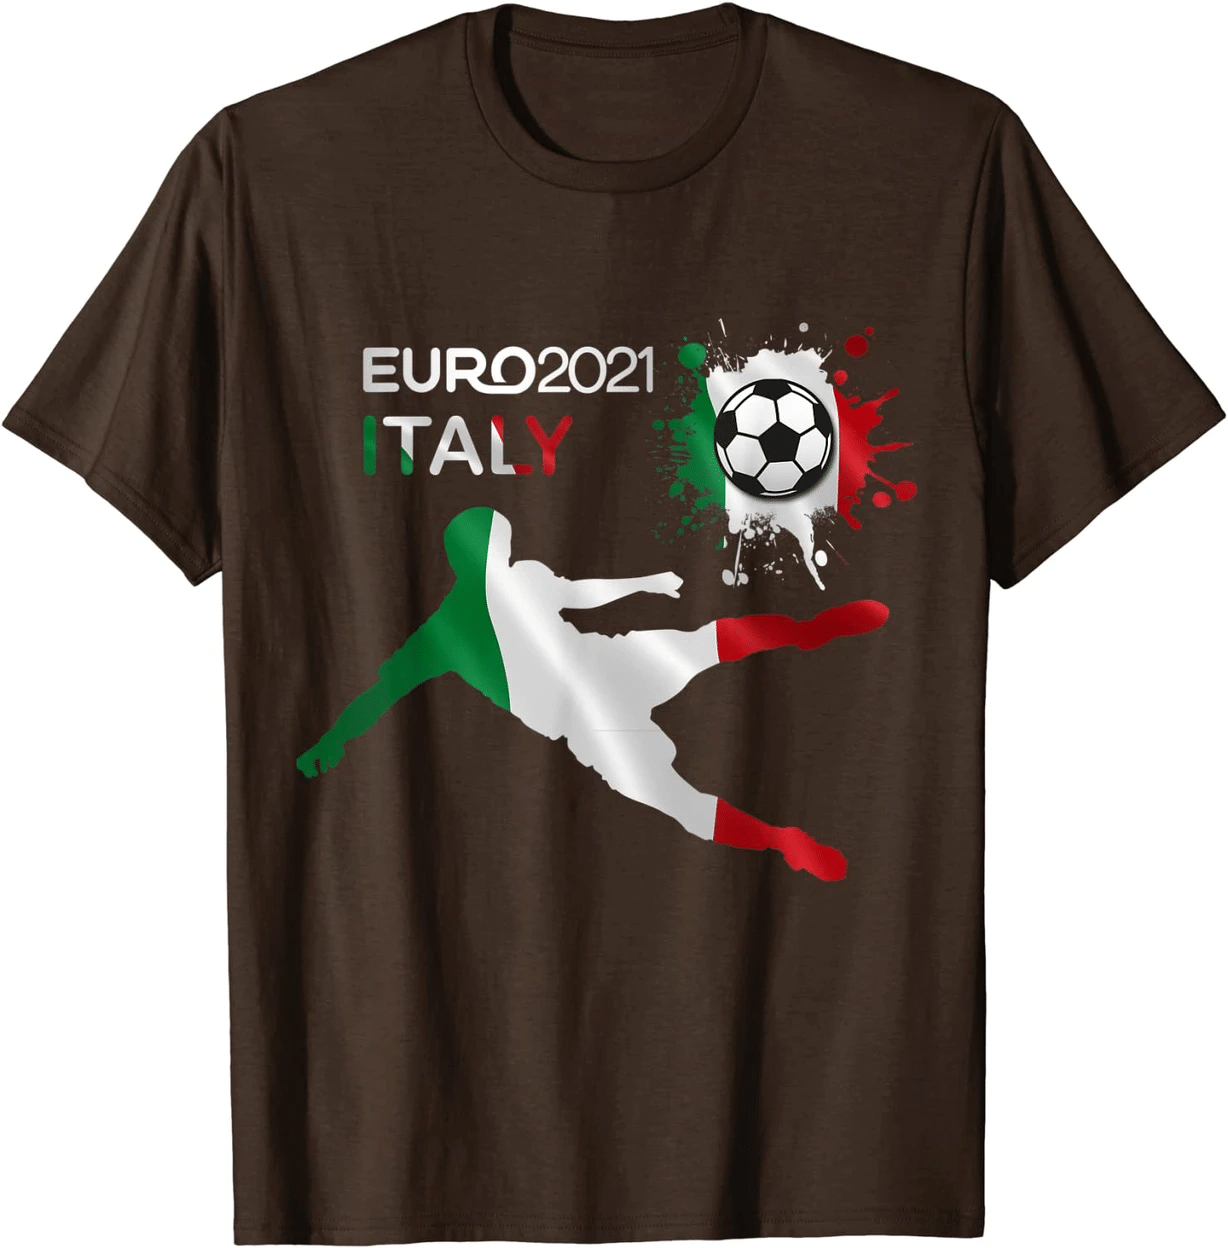 Italian, Italy Champions Euro 2021 Shirt Style: Unisex T-shirt, Color: Brown